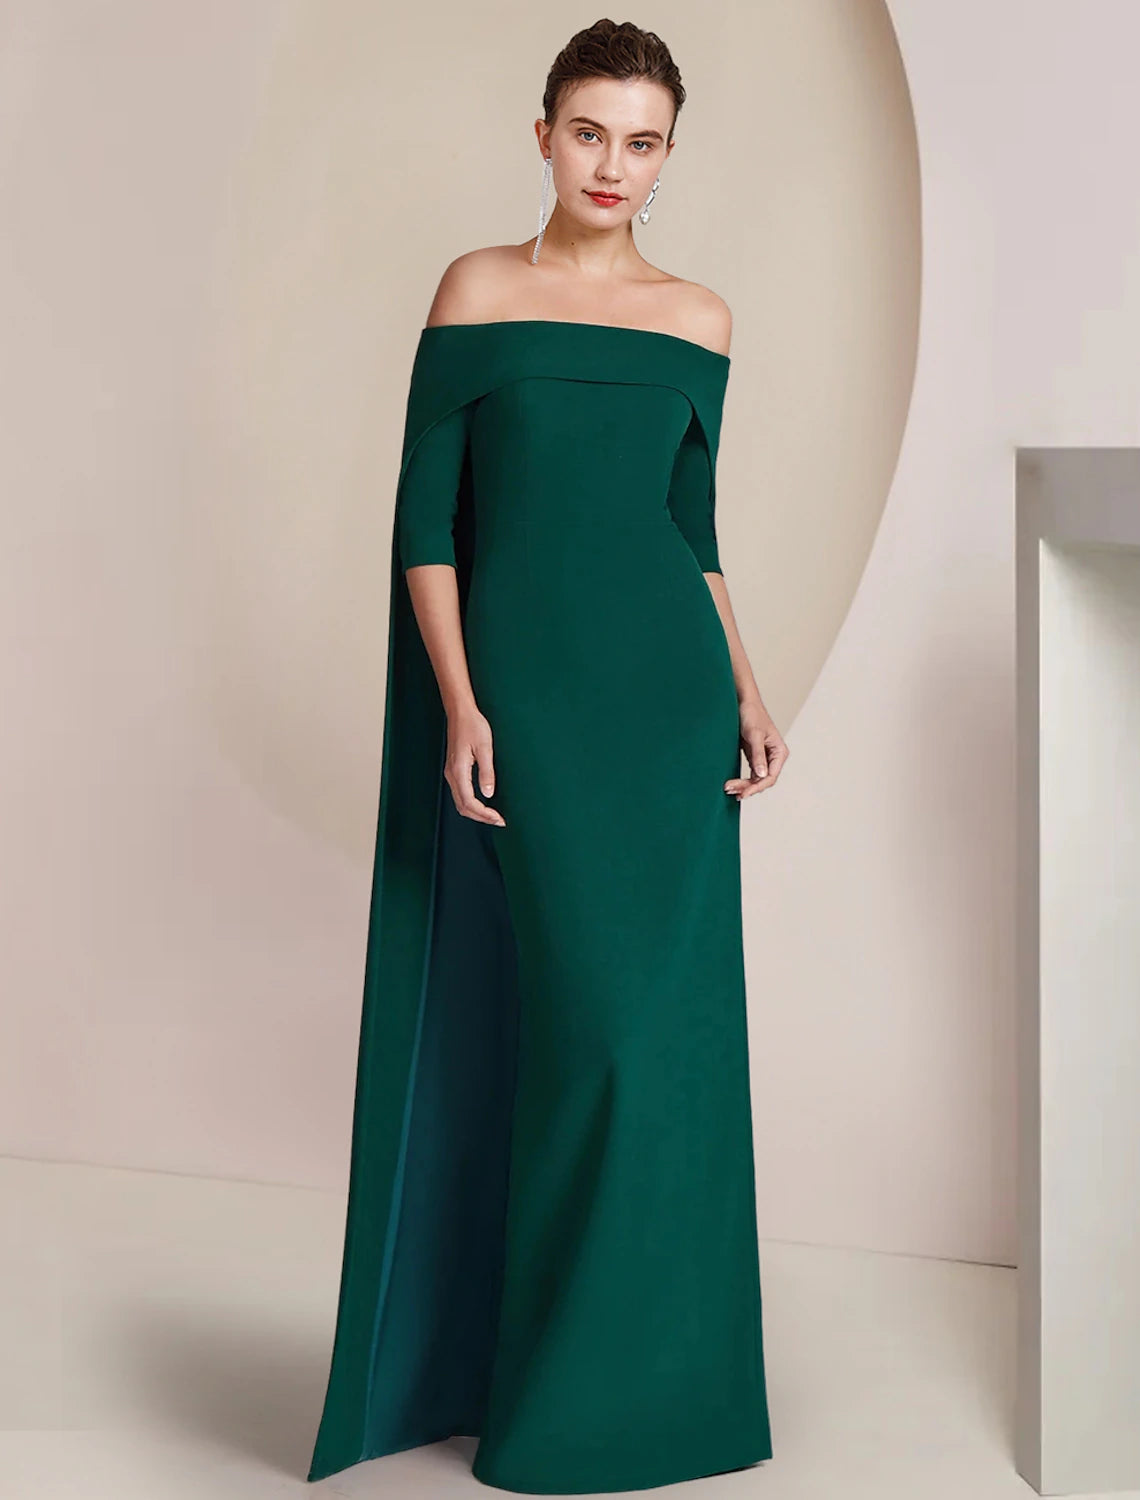 Sheath / Column Mother of the Bride Dress Formal Wedding Guest Elegant Strapless Floor Length Stretch Fabric Half Sleeve with Solid Color